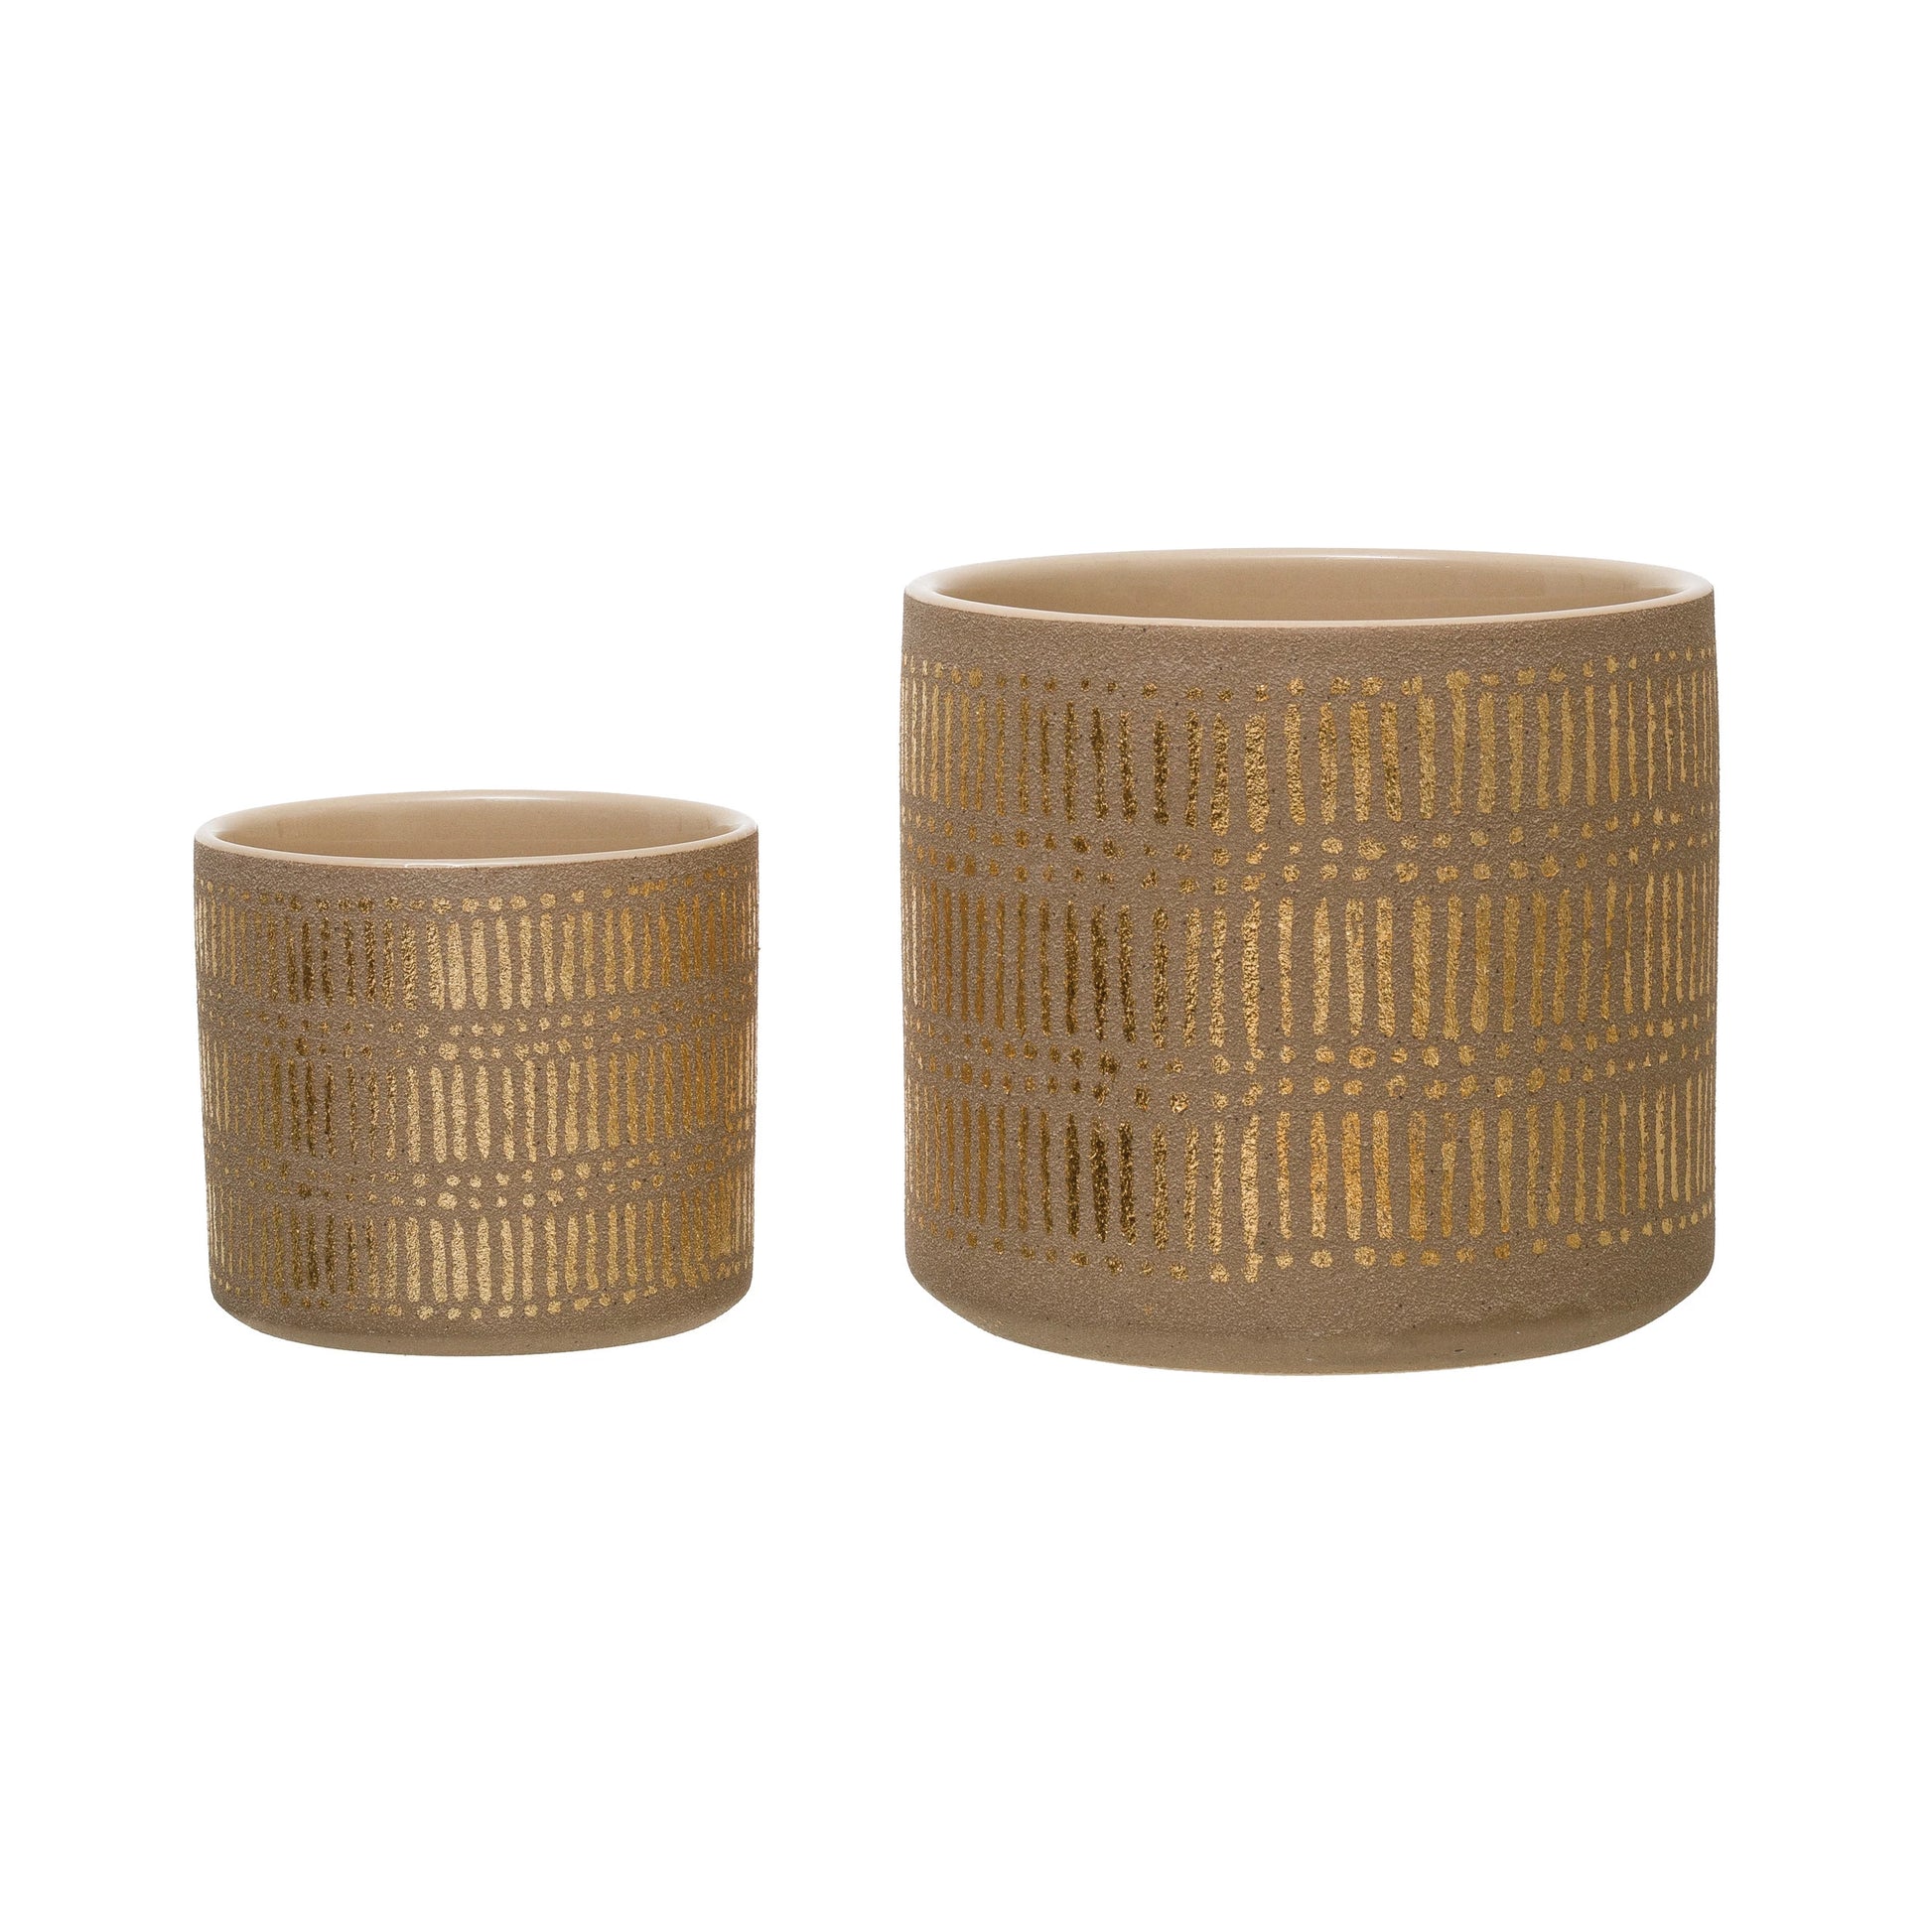 small and large stoneware planters with gold pattern on a white background